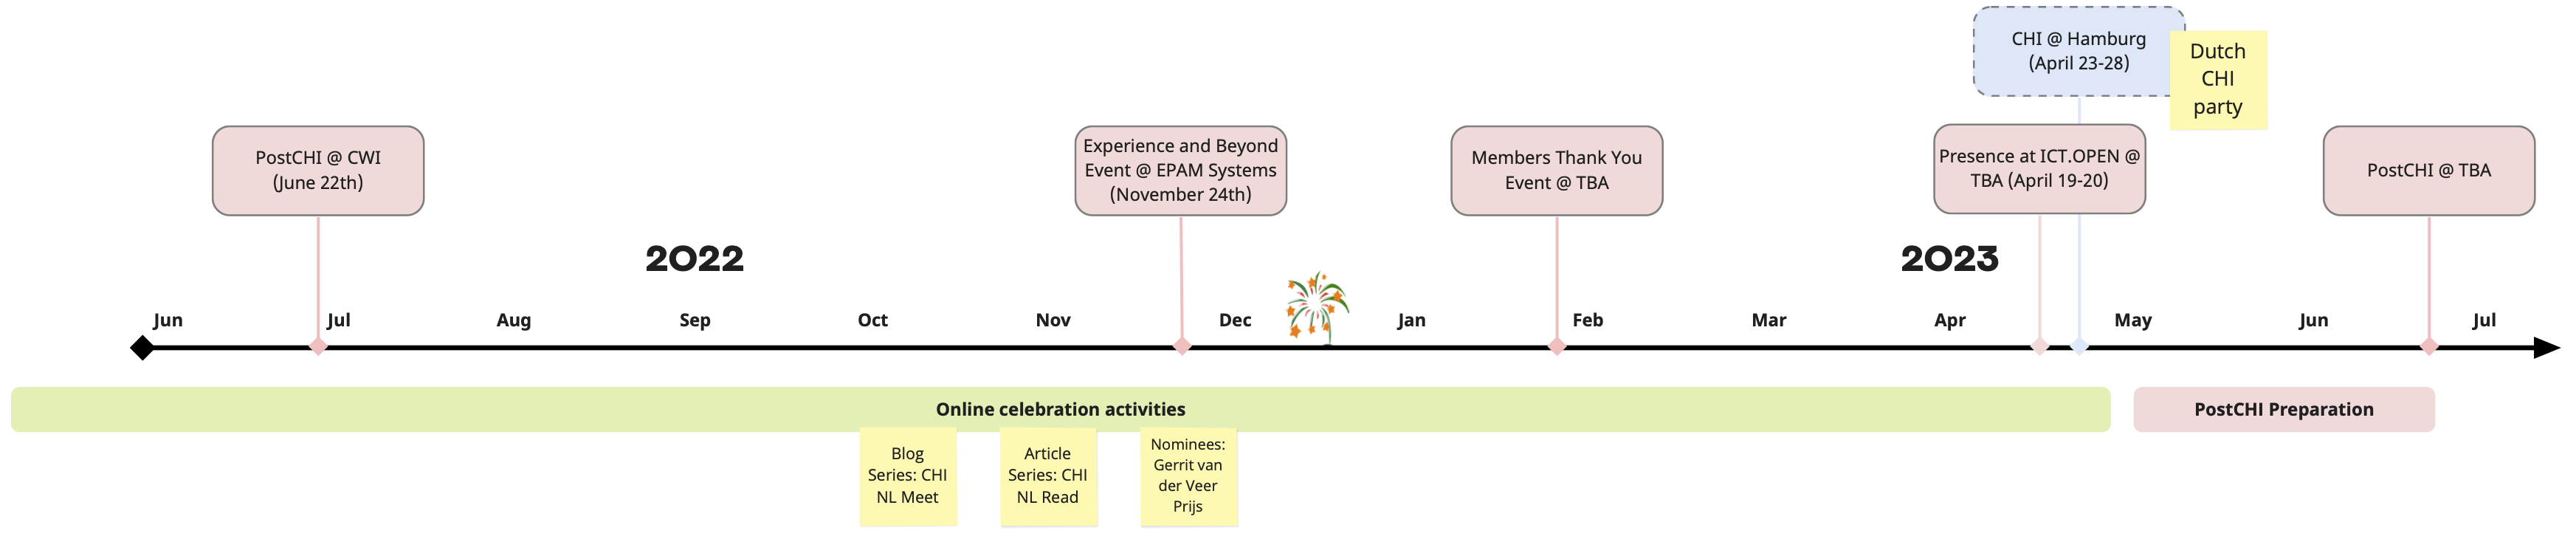 Image showing a timeline of CHI NL's celebratory year activities.